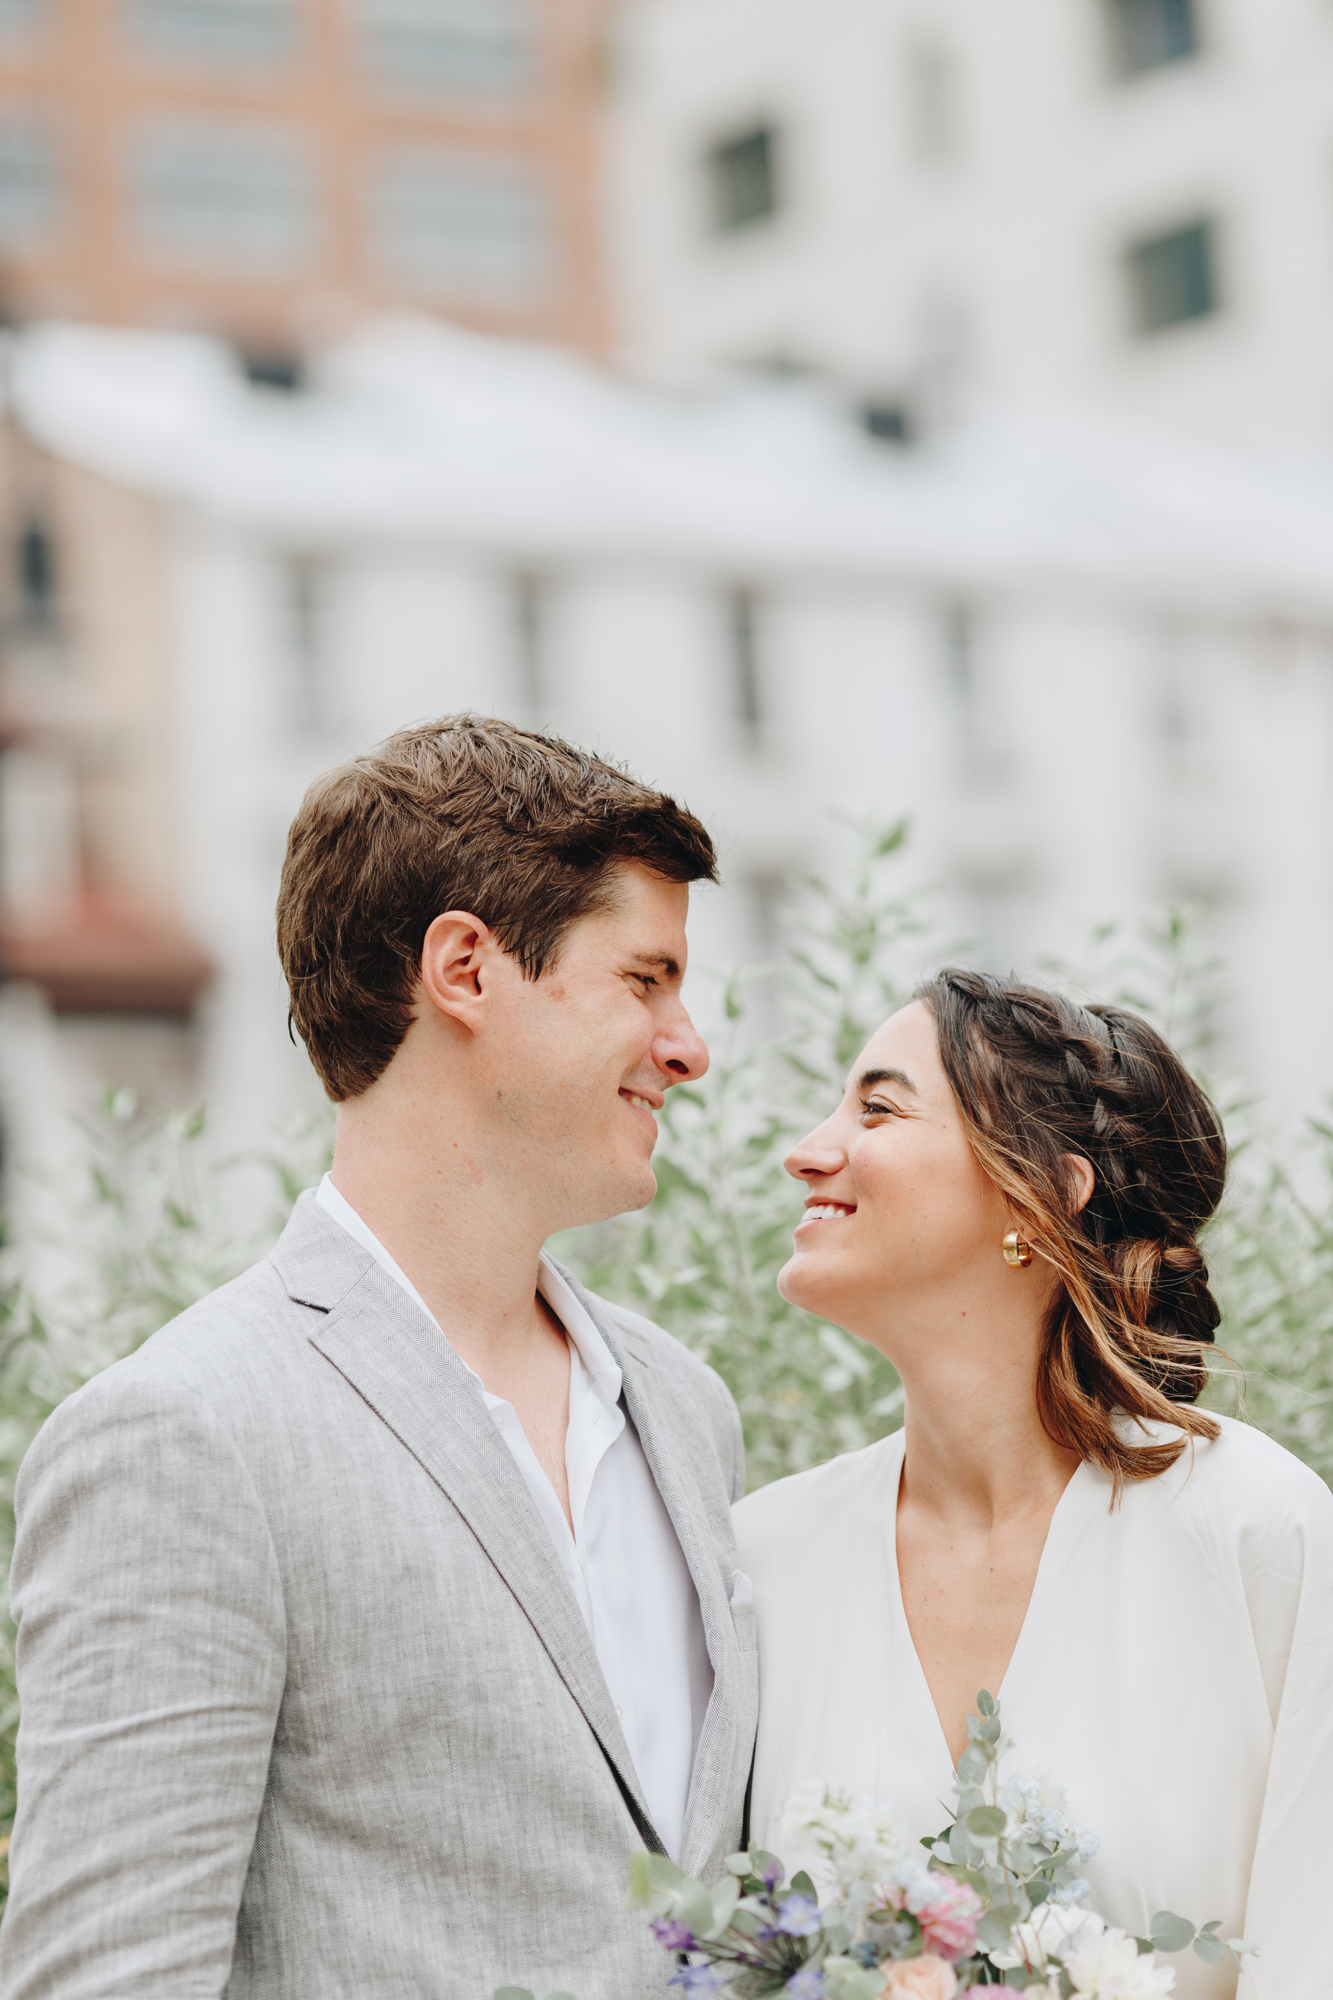 Meatpacking District NYC micro wedding photo with bride and groom